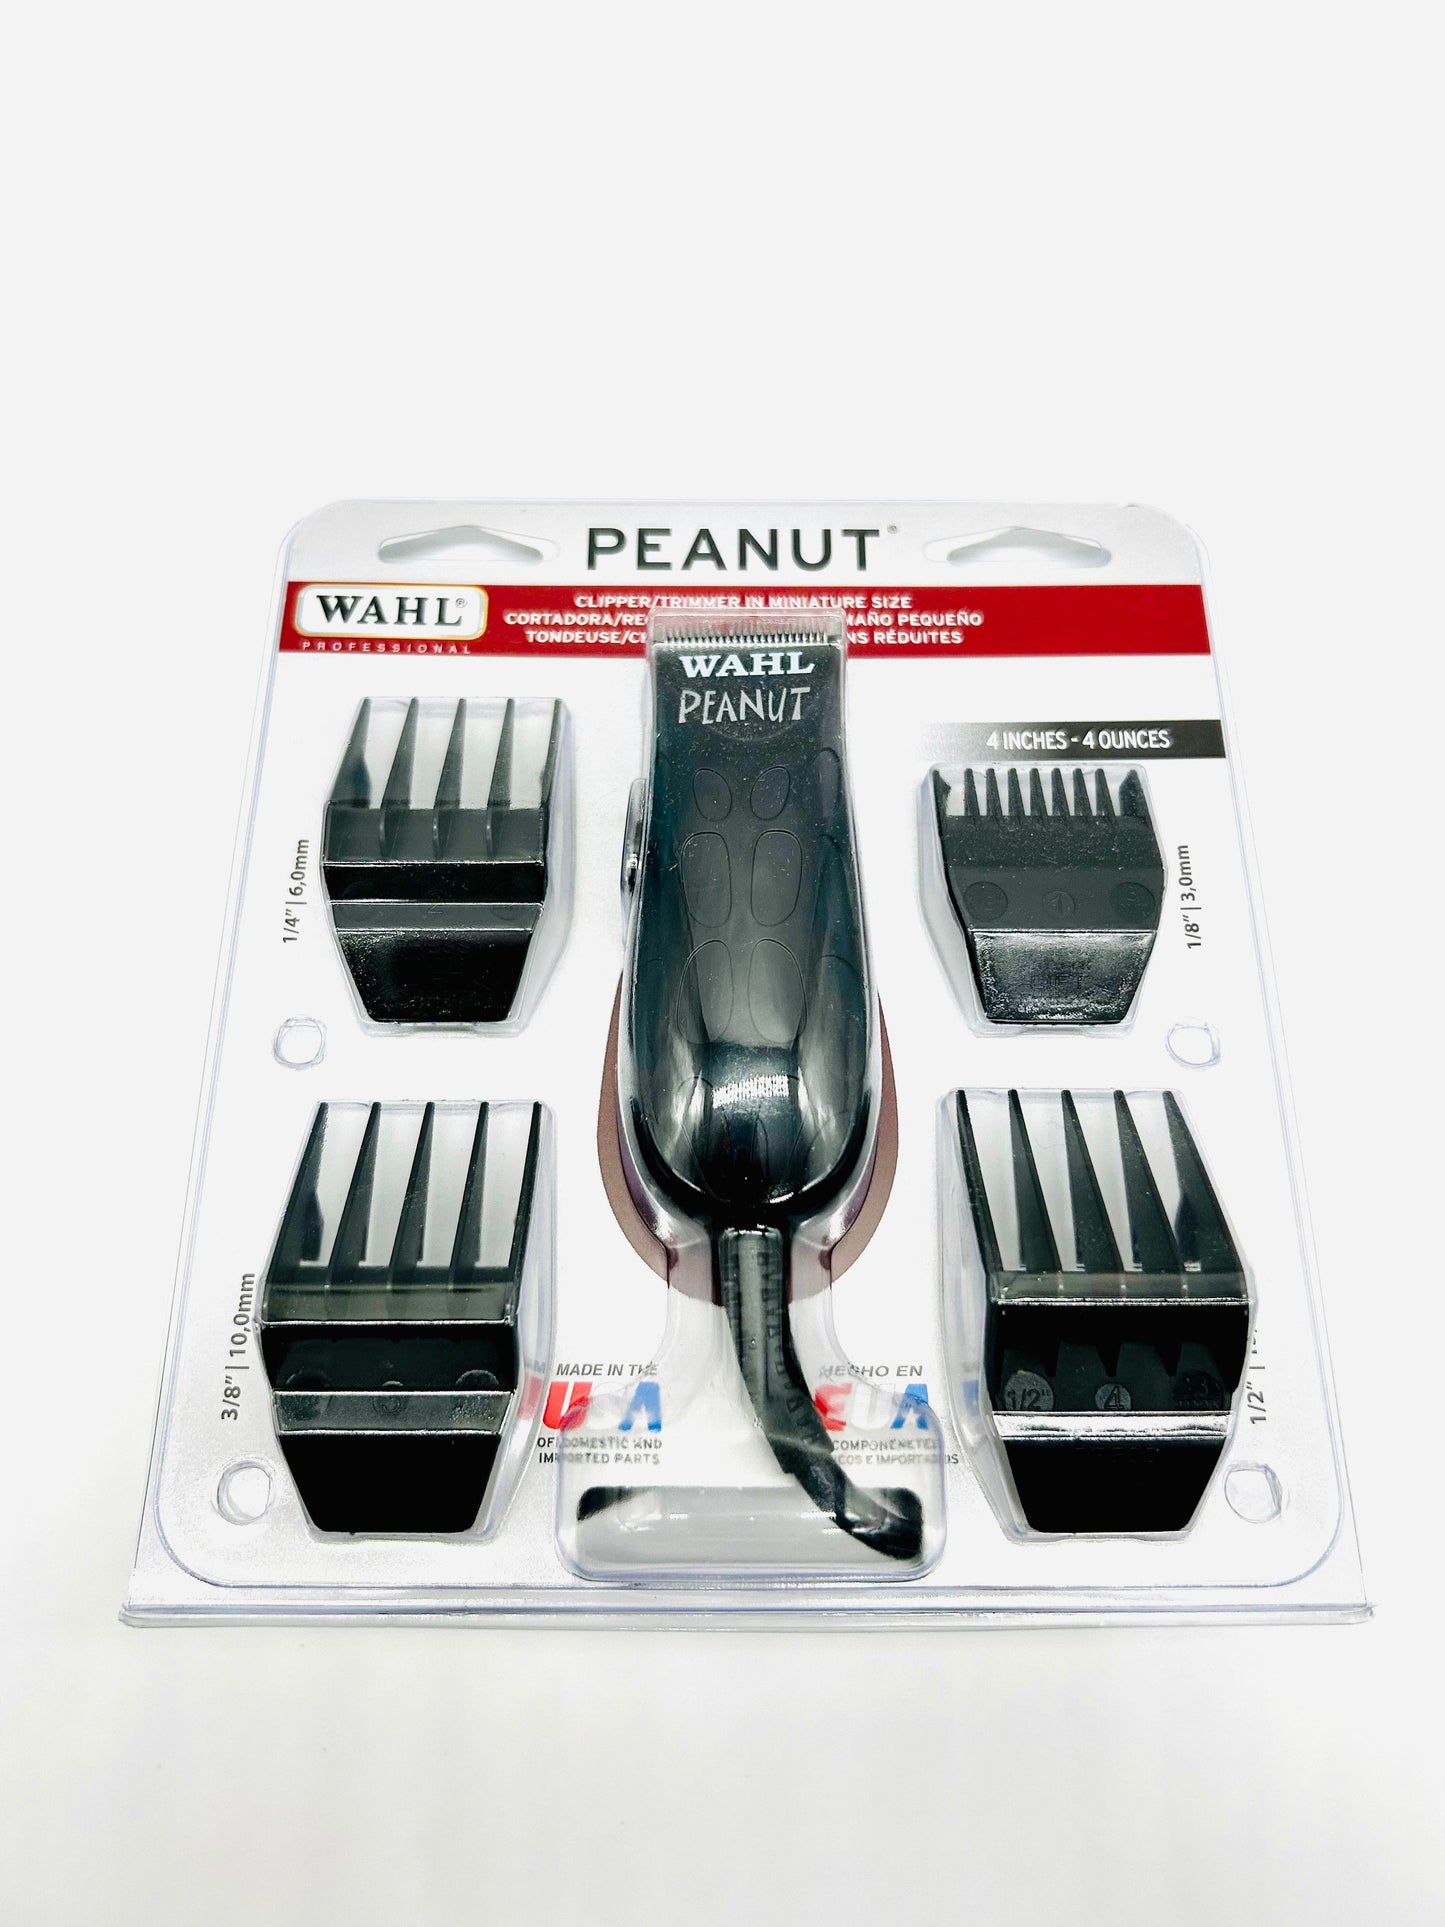 Wahl Peanut Professional Hair Trimmer/Clipper Black 8655-200 Hair Clippers & Trimmers